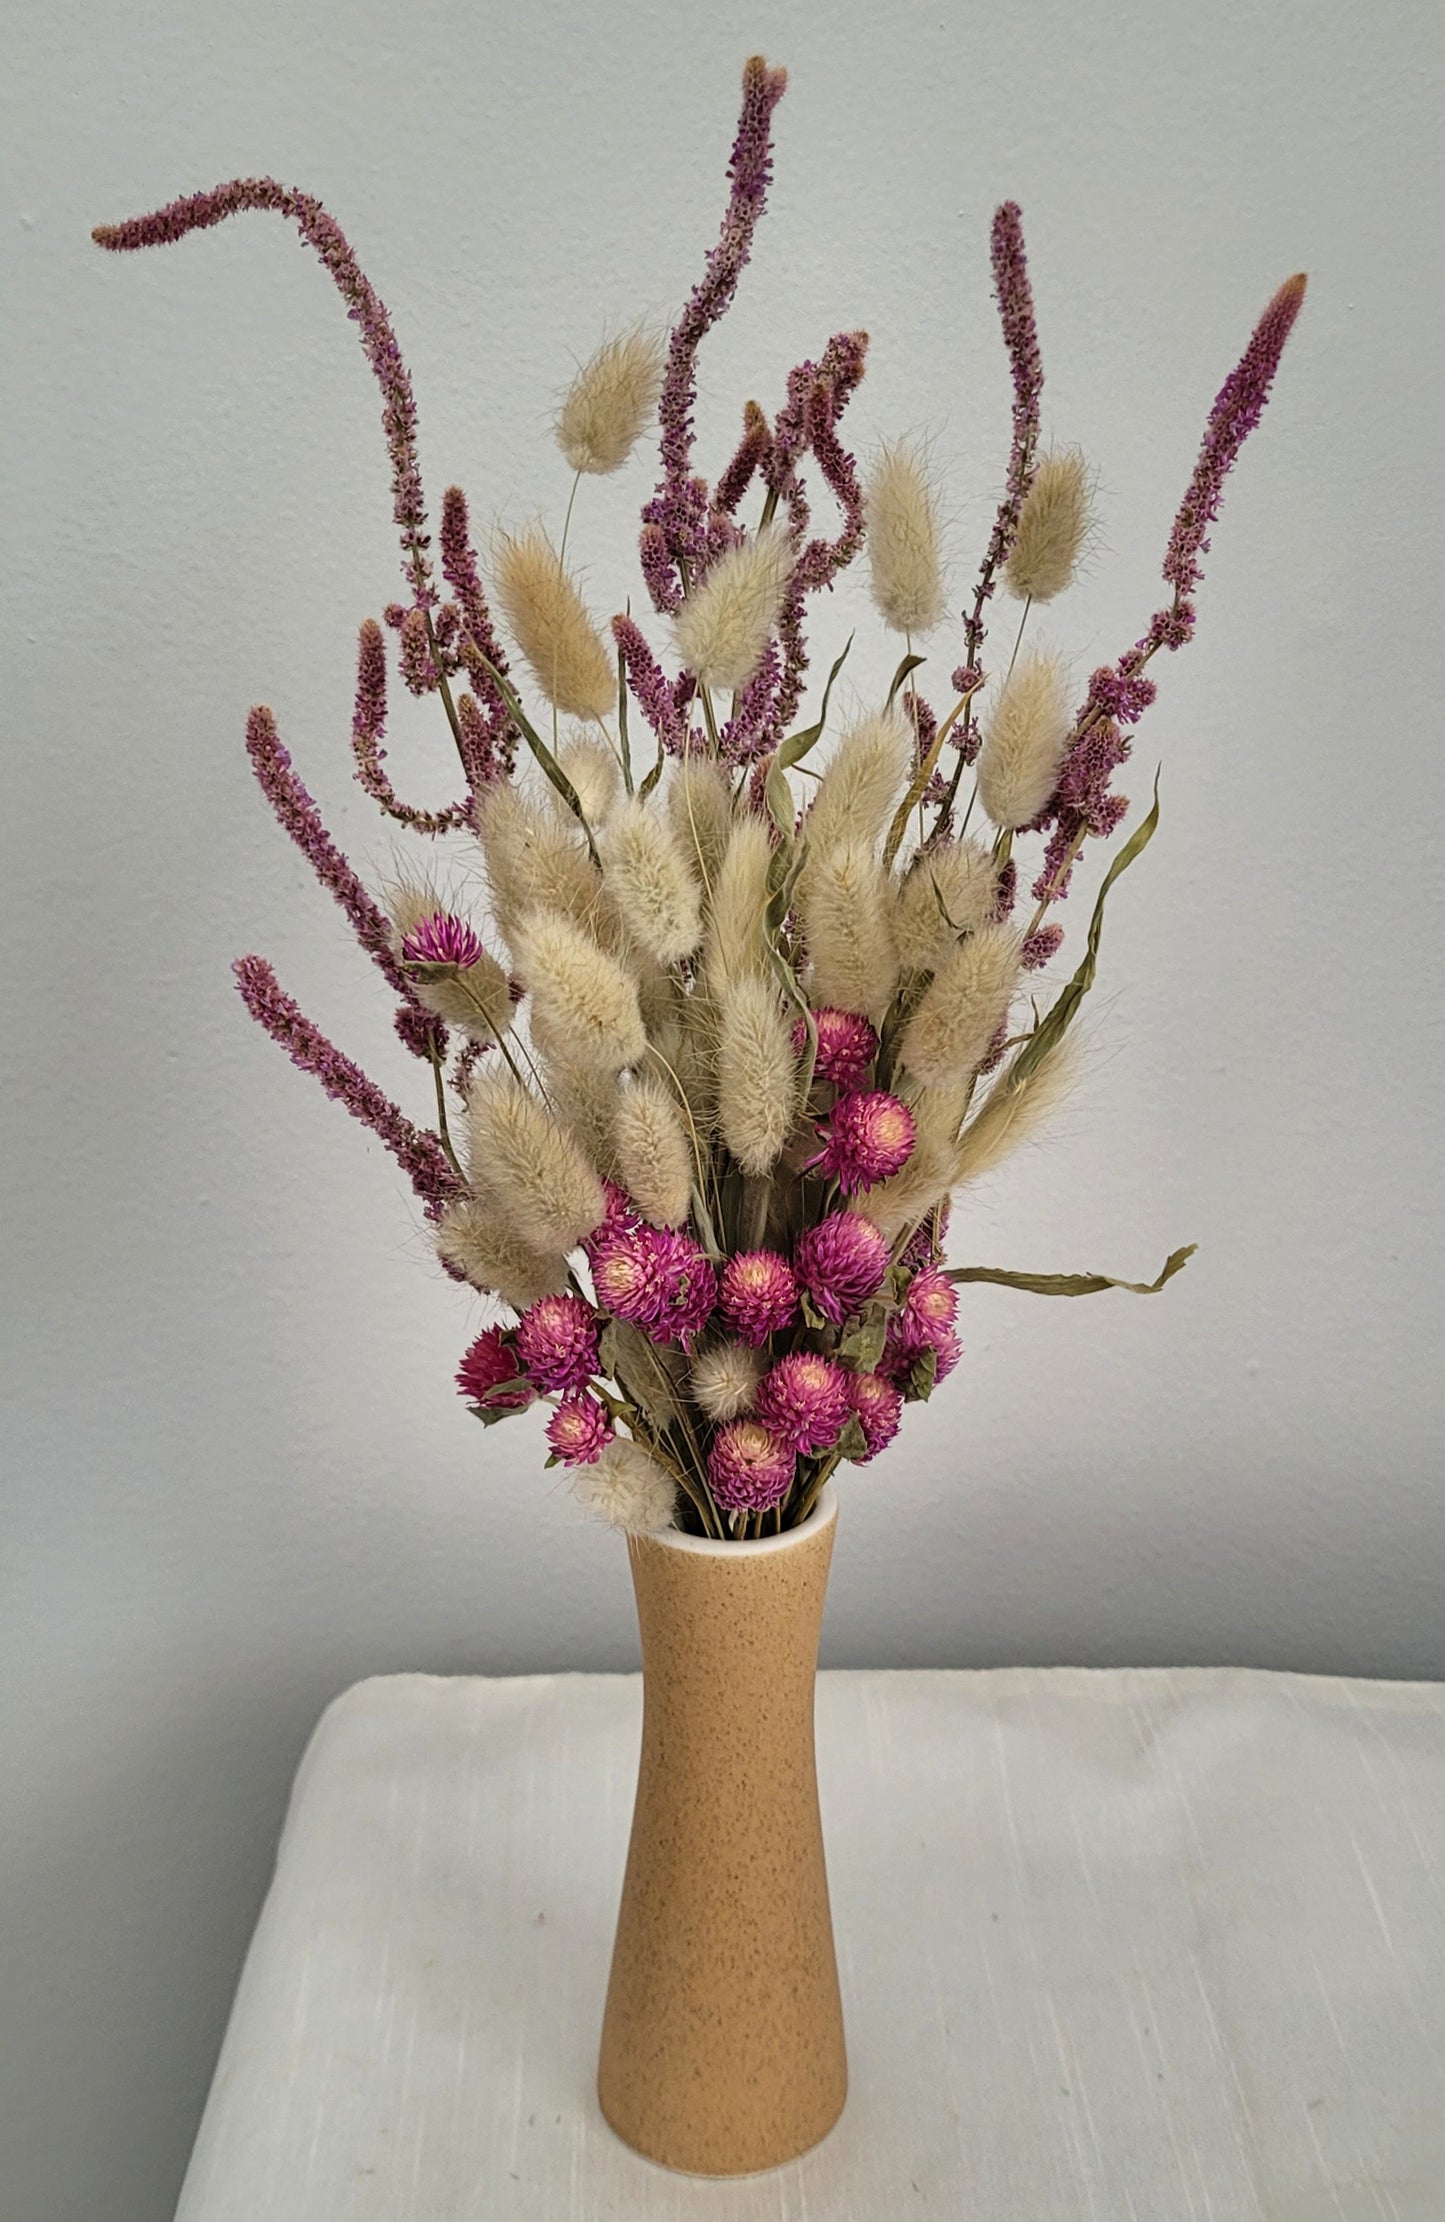 Dried Flowers in a small ceramic vase